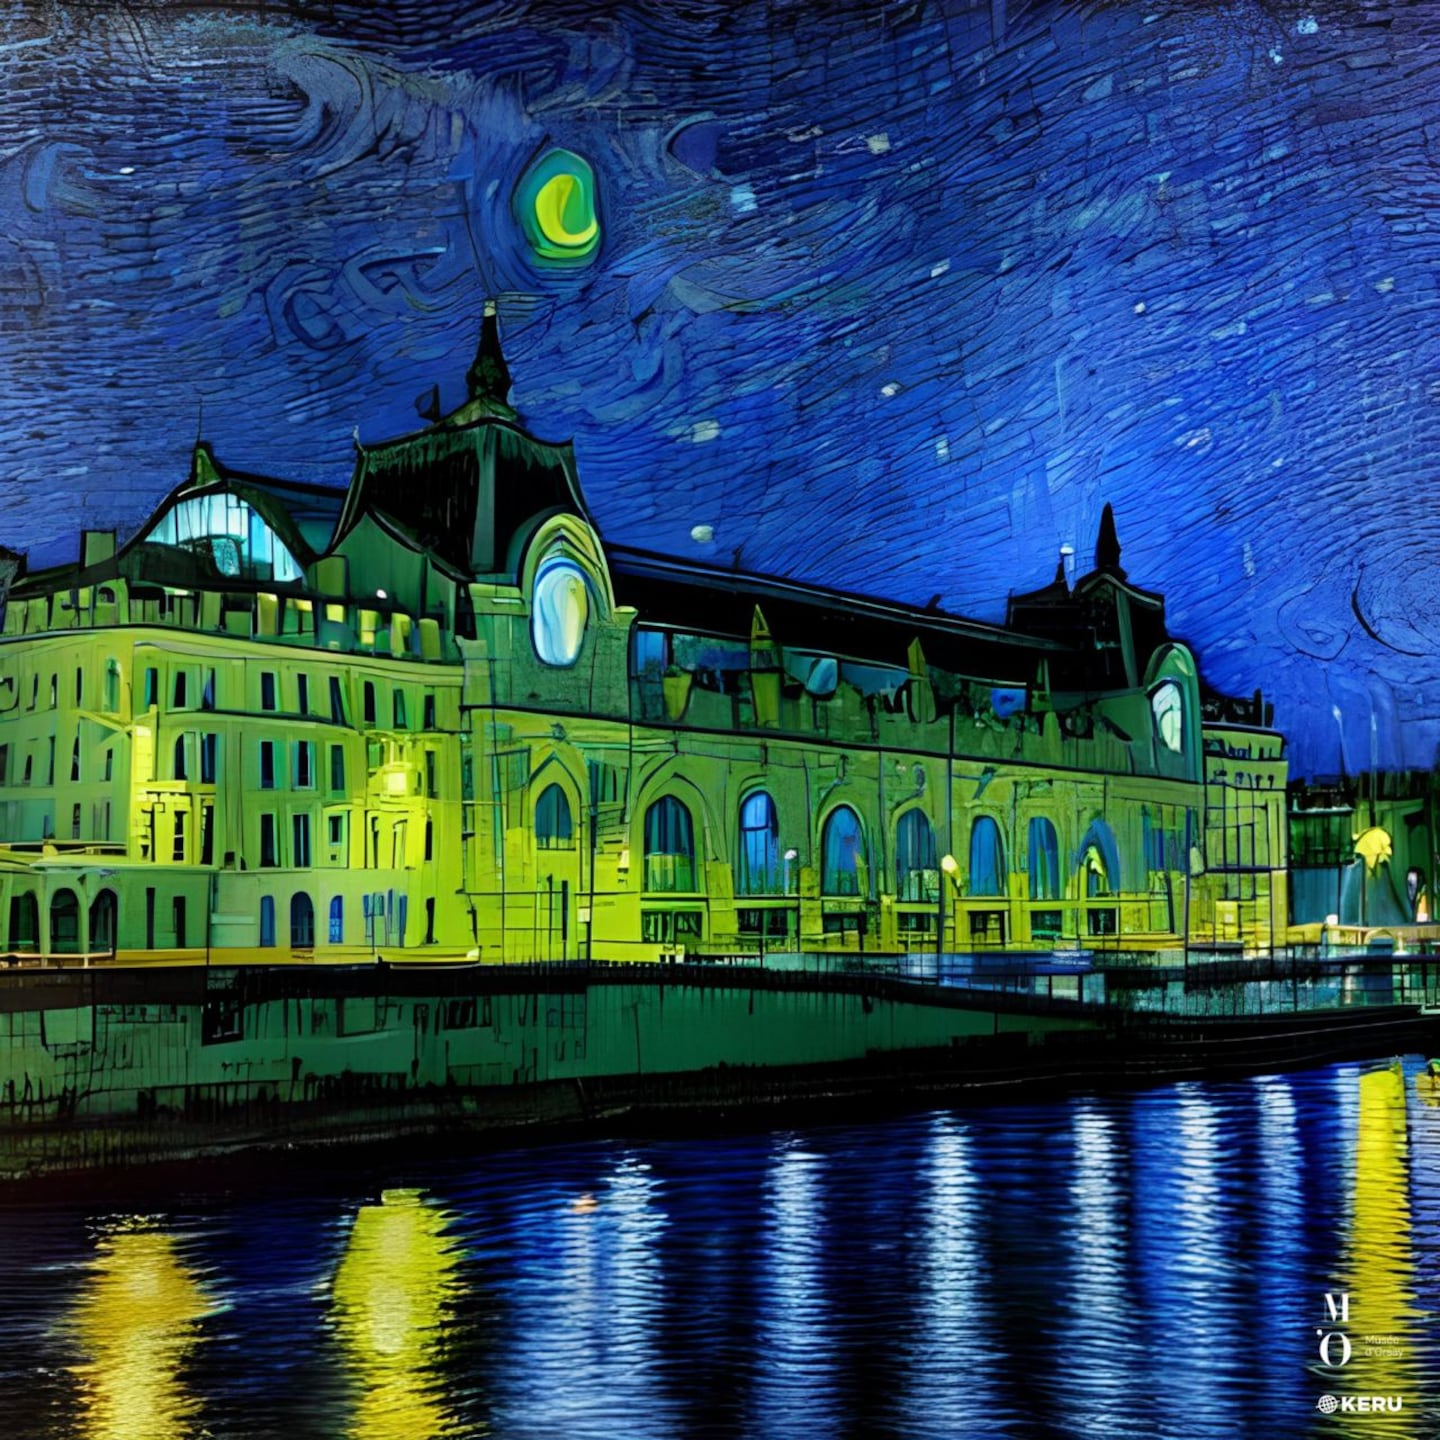 Musée d’Orsay in a starry night, digital souvenir by KERU created for the Musée d’Orsay ©️ Musée d’Orsay and KERU